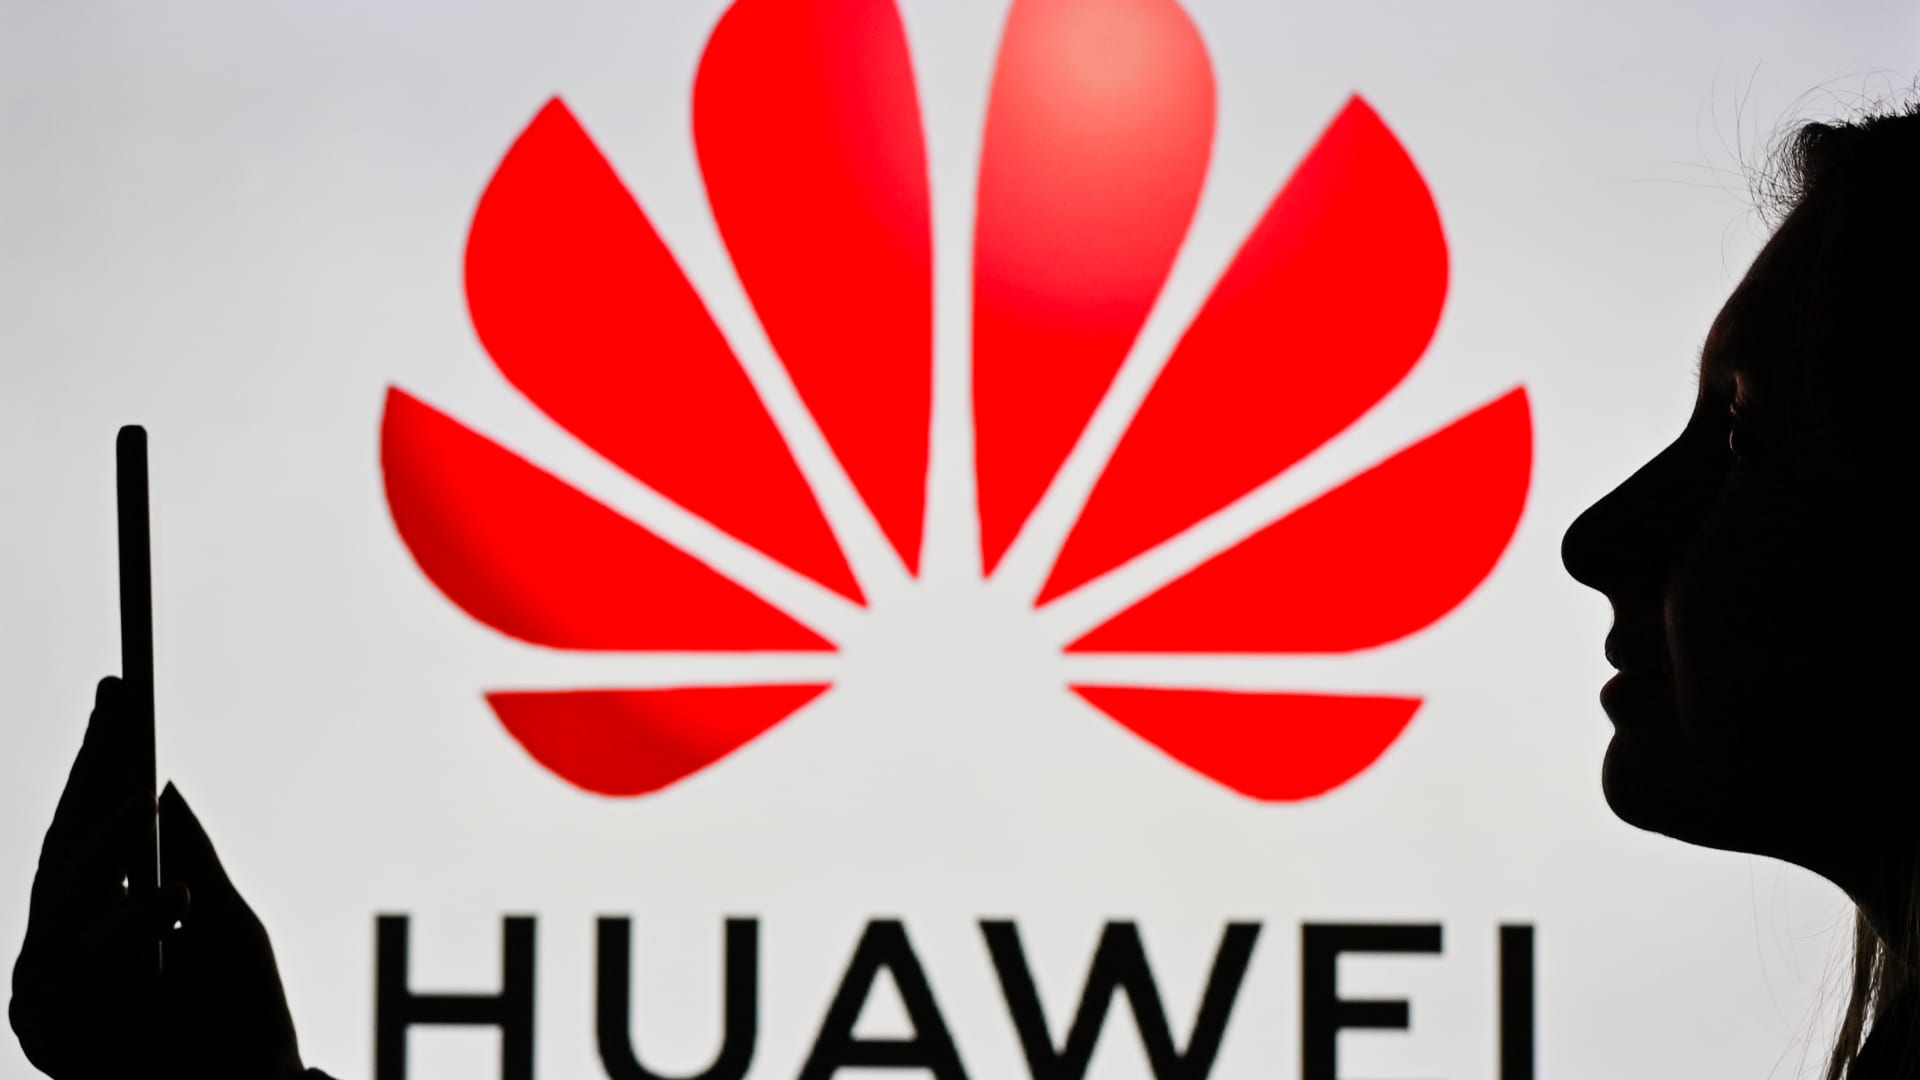 Huawei reportedly says it has developed domestic chip design tools despite U.S. sanctions